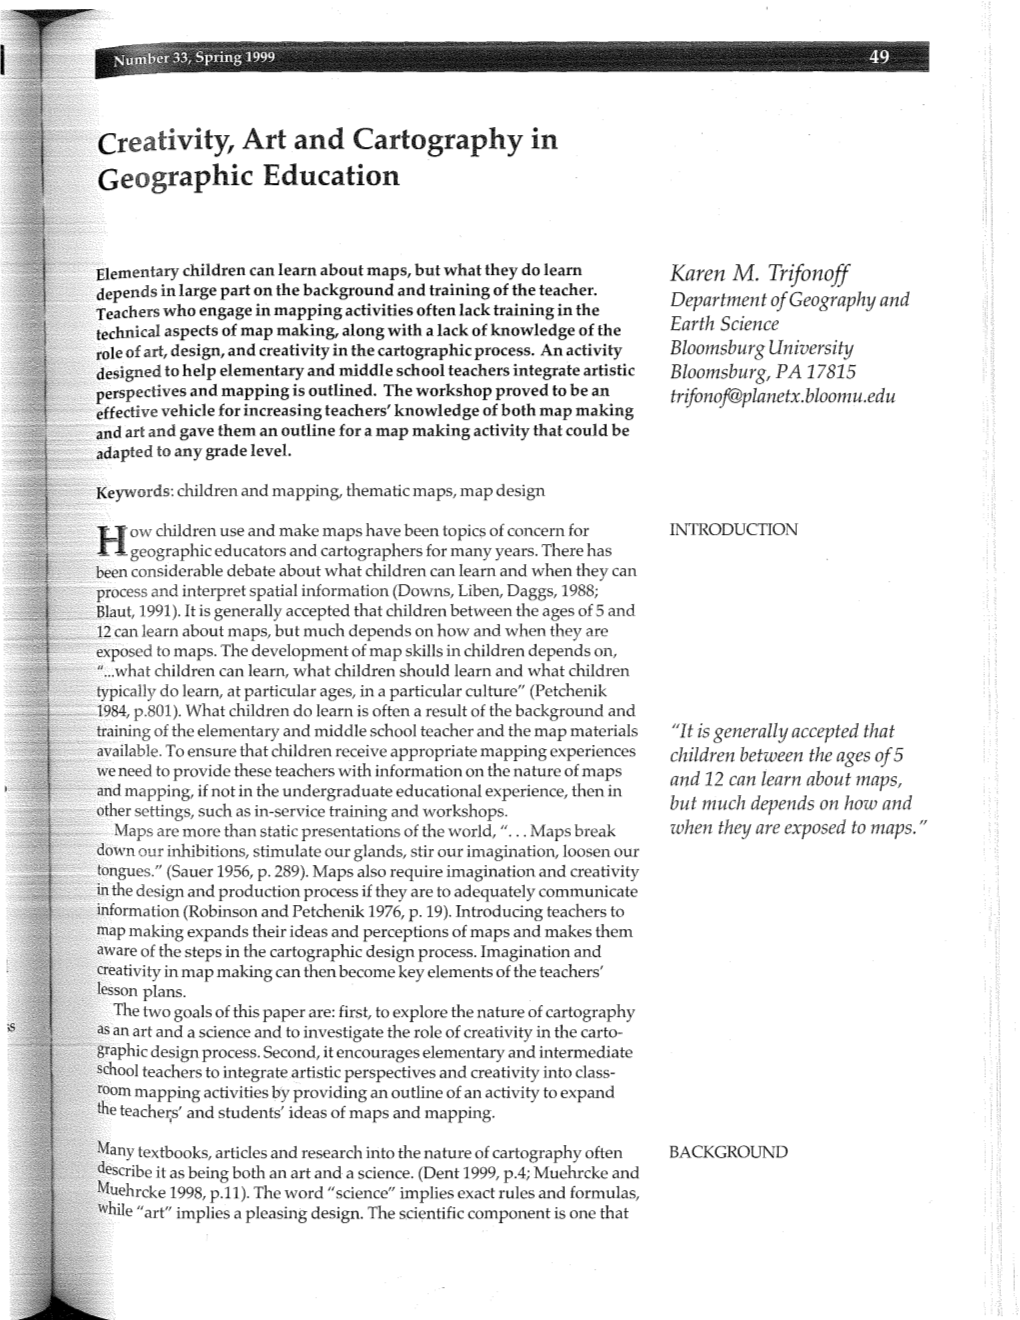 Creativity, Art and Cartography in Geographic Education